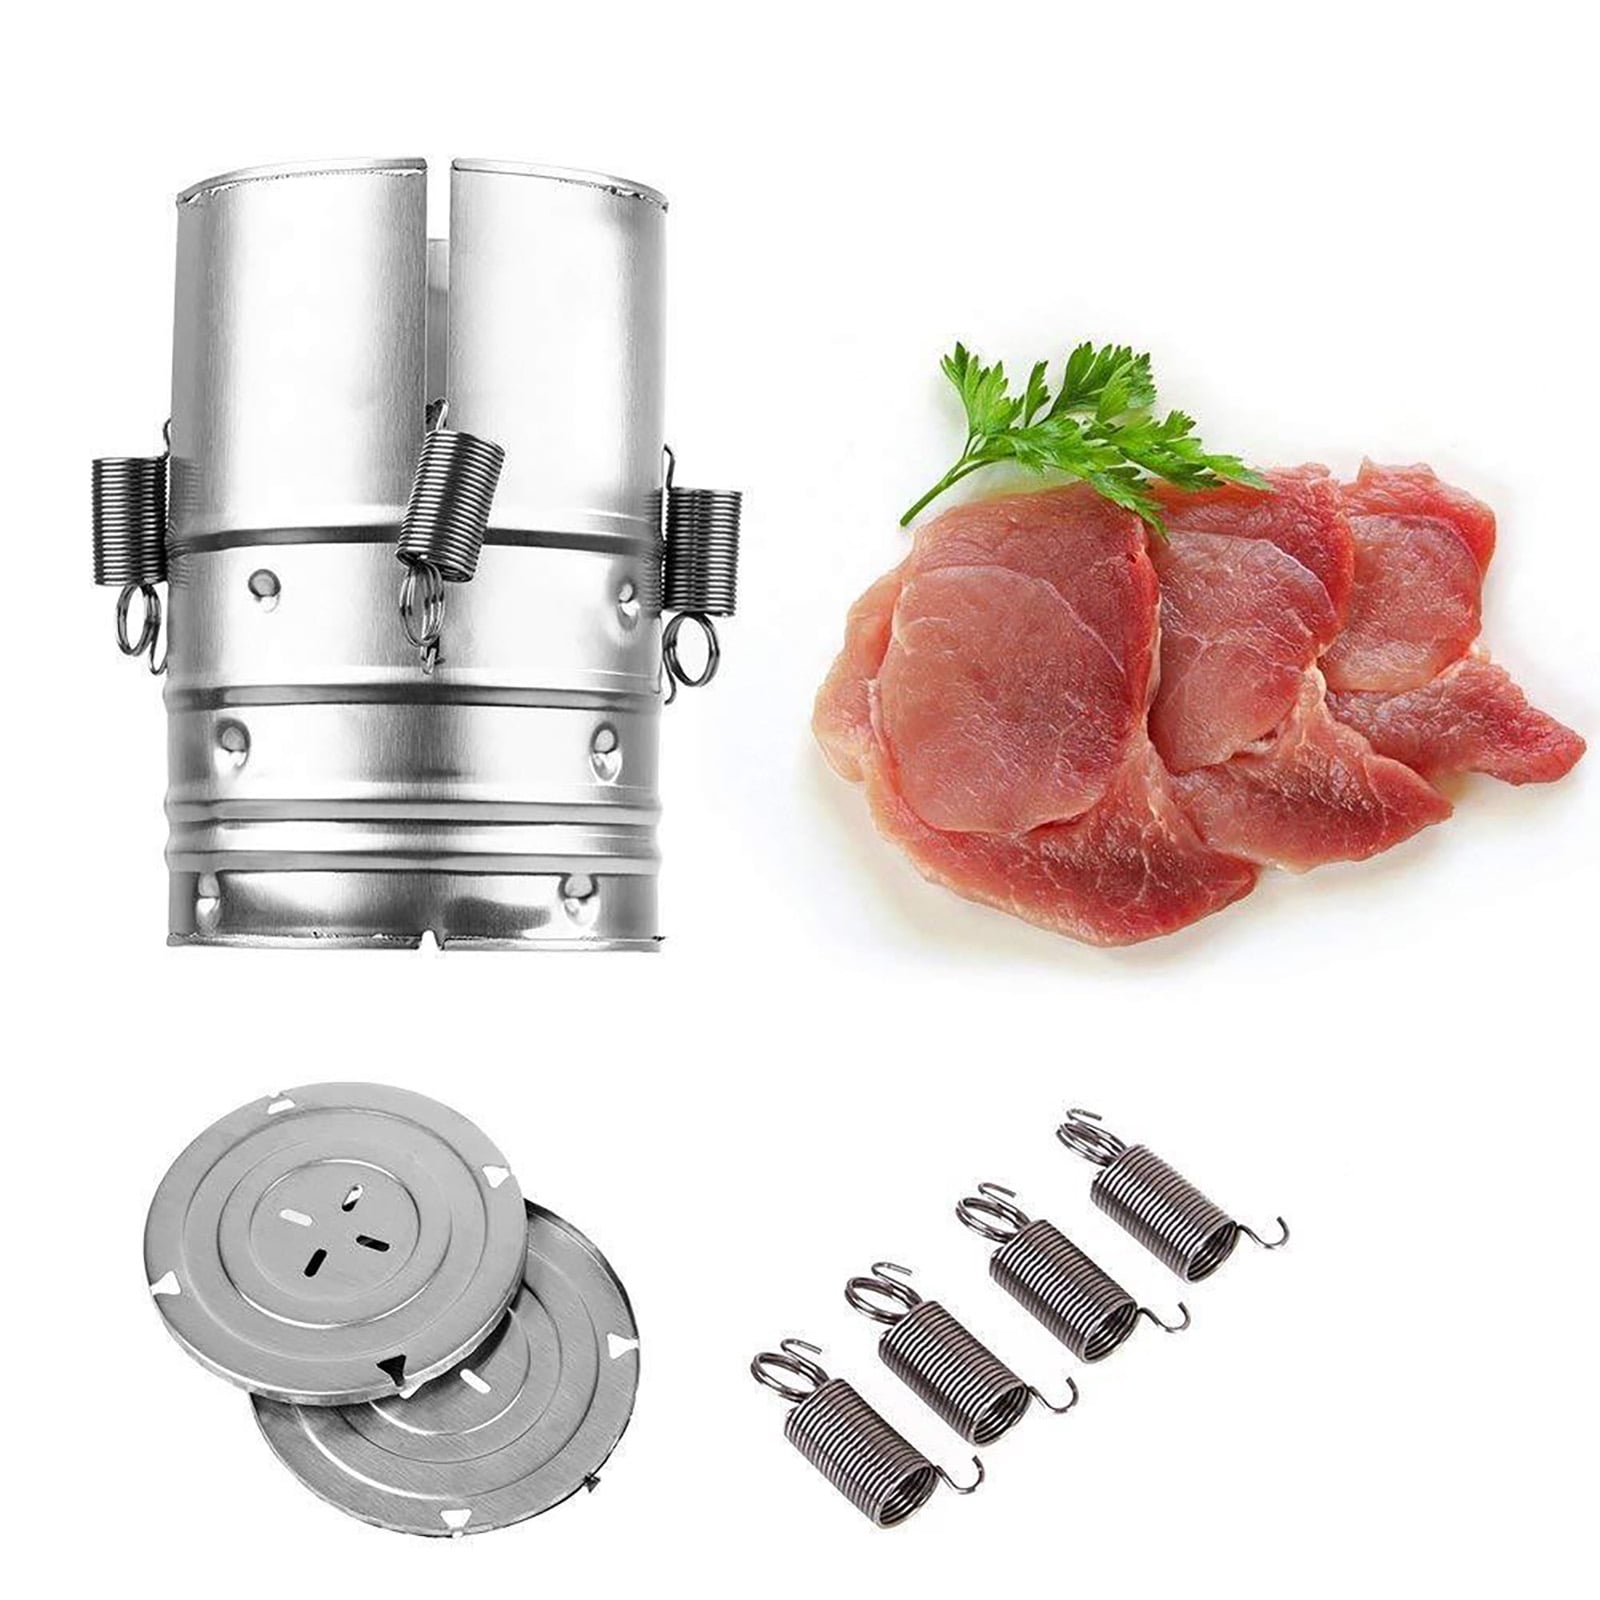 Stainless Steel Ham Maker Meat Press Cooker for Making Healthy Homemade  Deli Meat with Thermometer - Kitchen Bacon Meat Pressure Cookers Boiler Pot